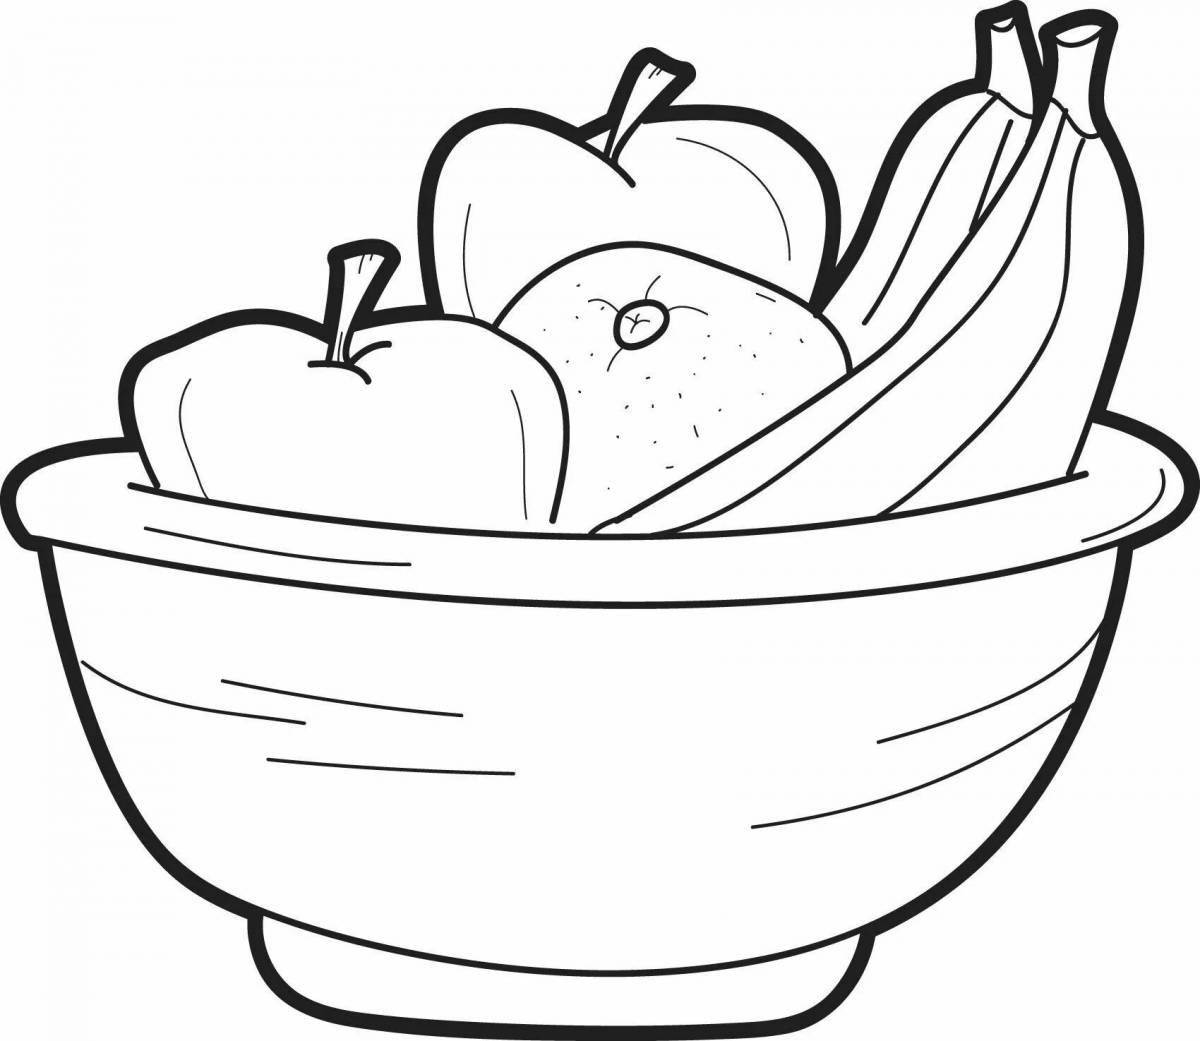 Gorgeous fruit plate coloring book